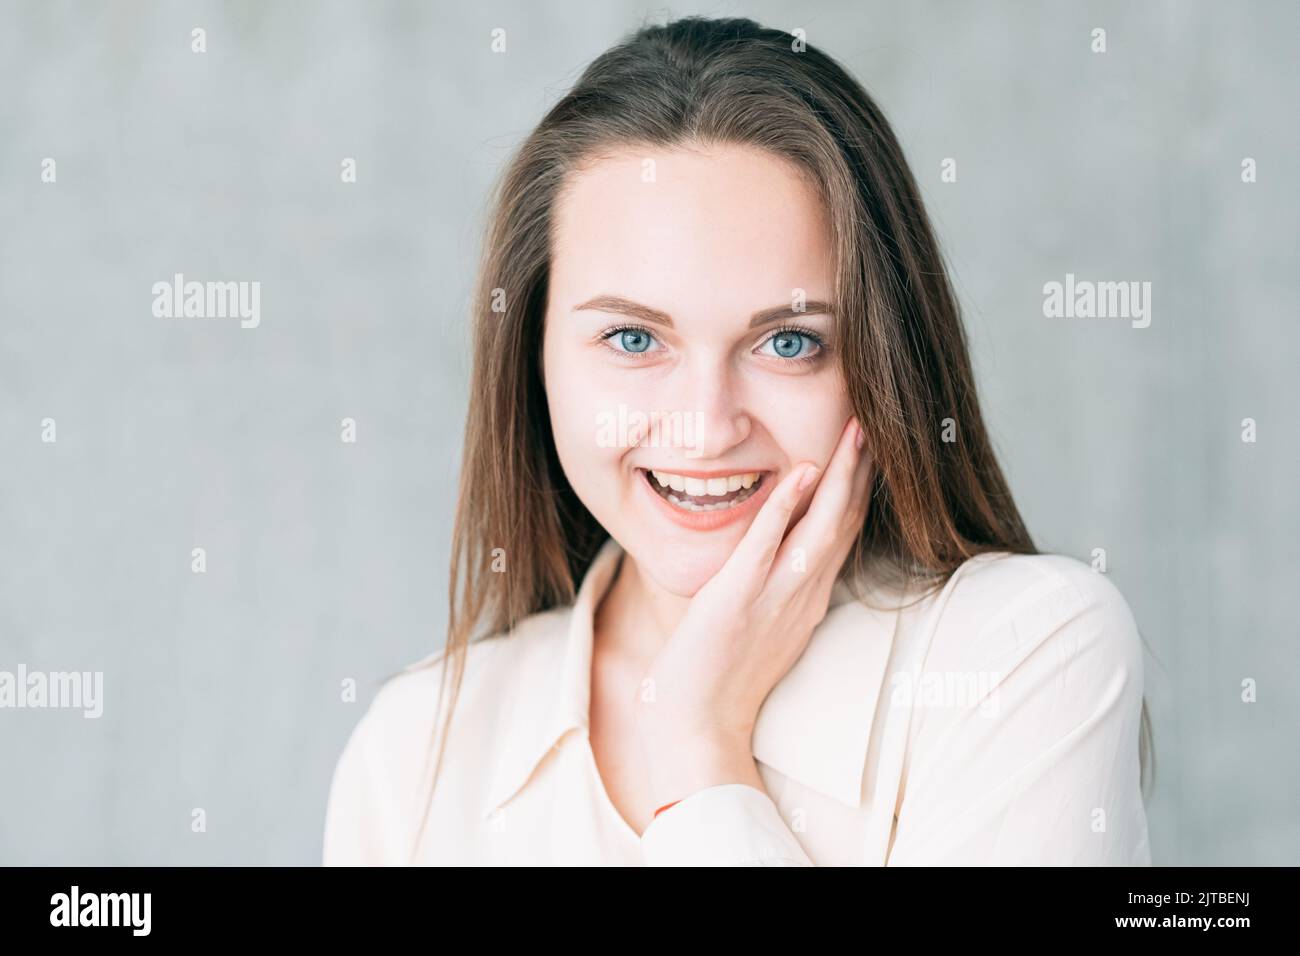 excited young woman skin care youth beauty Stock Photo